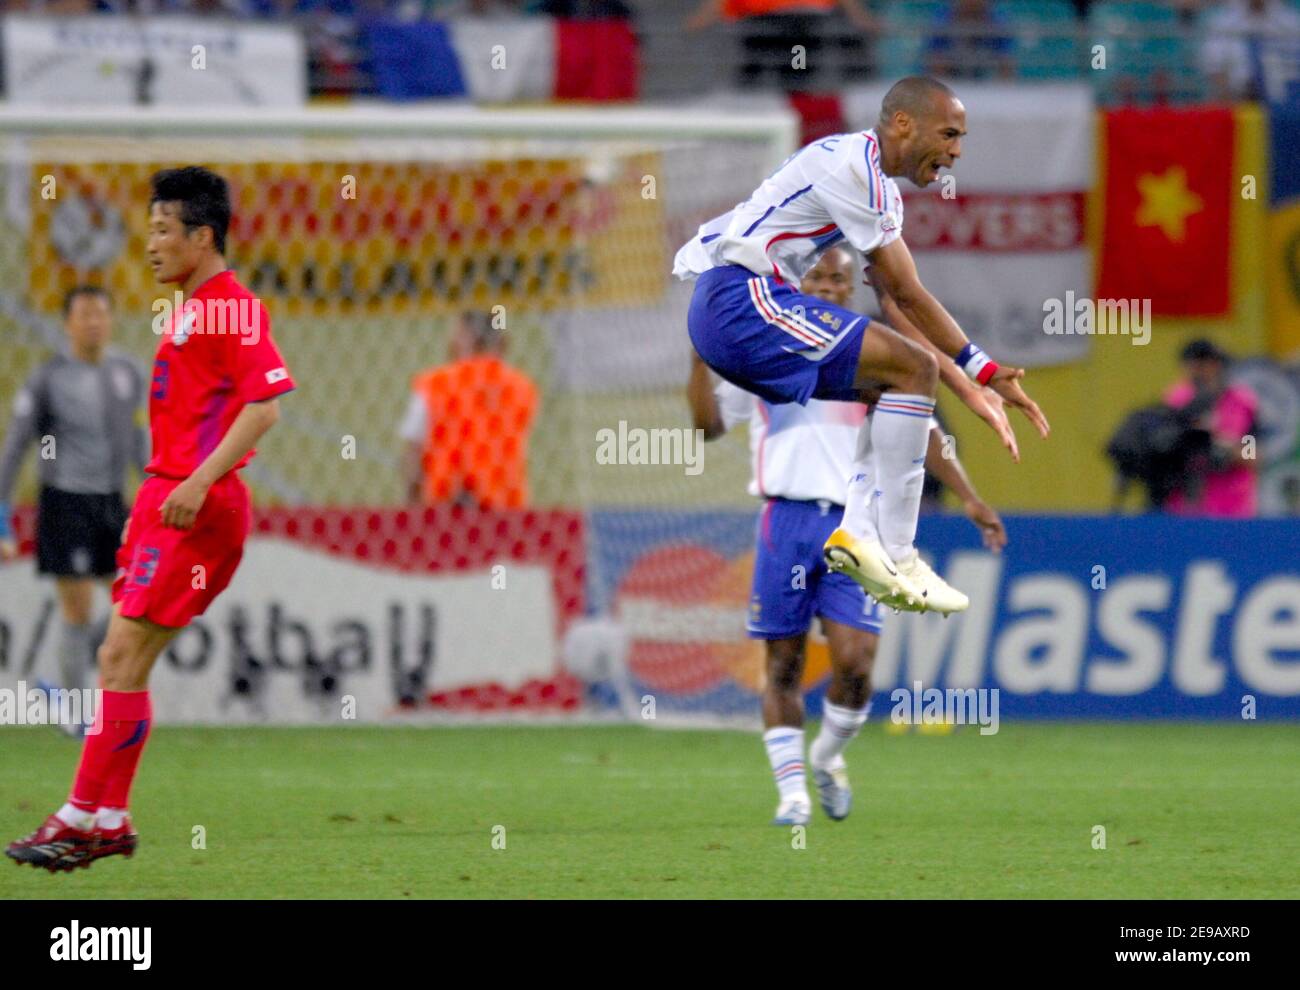 France's Thierry Henry during the World Cup 2006, Group G, France vs South Korea at the Zentralstadion stadium in Leipzig, Germany on June 18, 2006. The game ended in a draw 1-1. Photo by Gouhier-Hahn-Orban/Cameleon/ABACAPRESS.COM Stock Photo